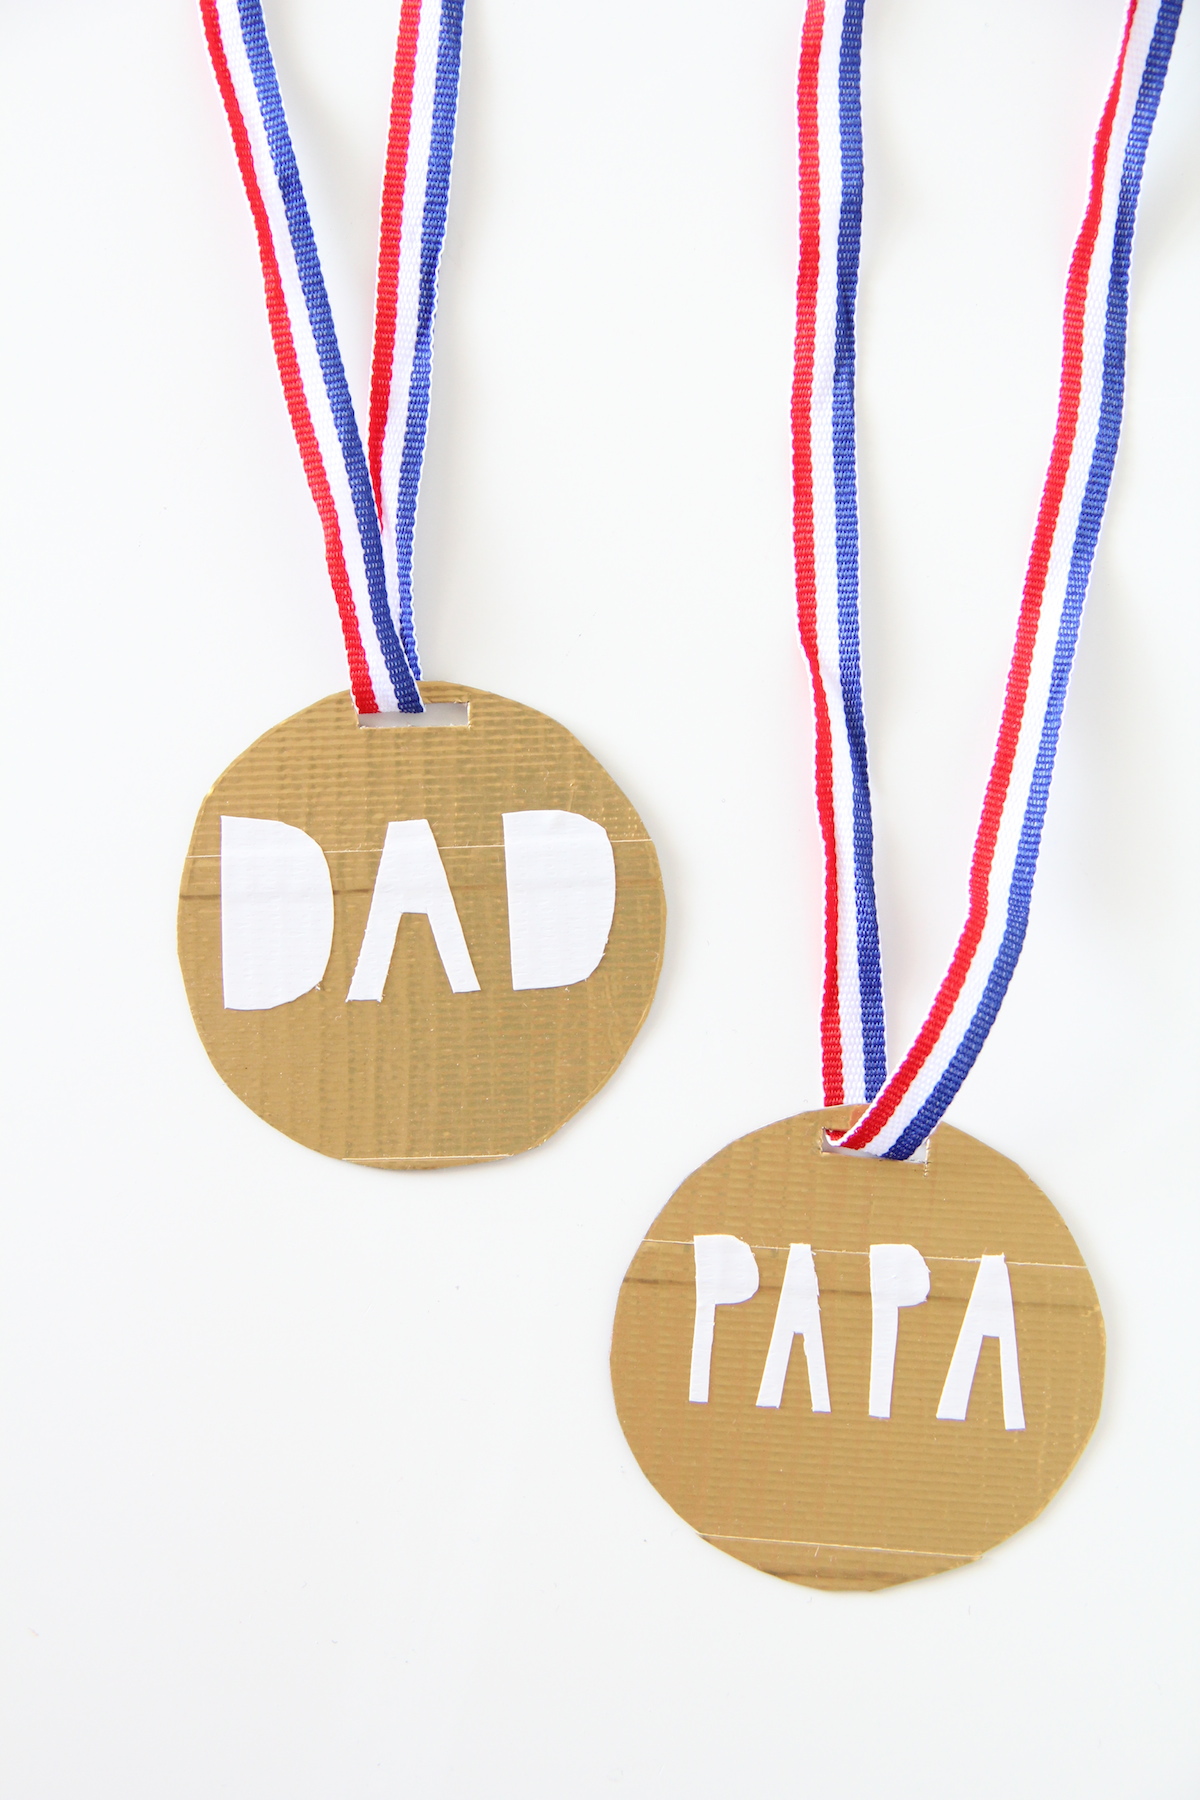 FATHER'S DAY MEDALS — And We Play